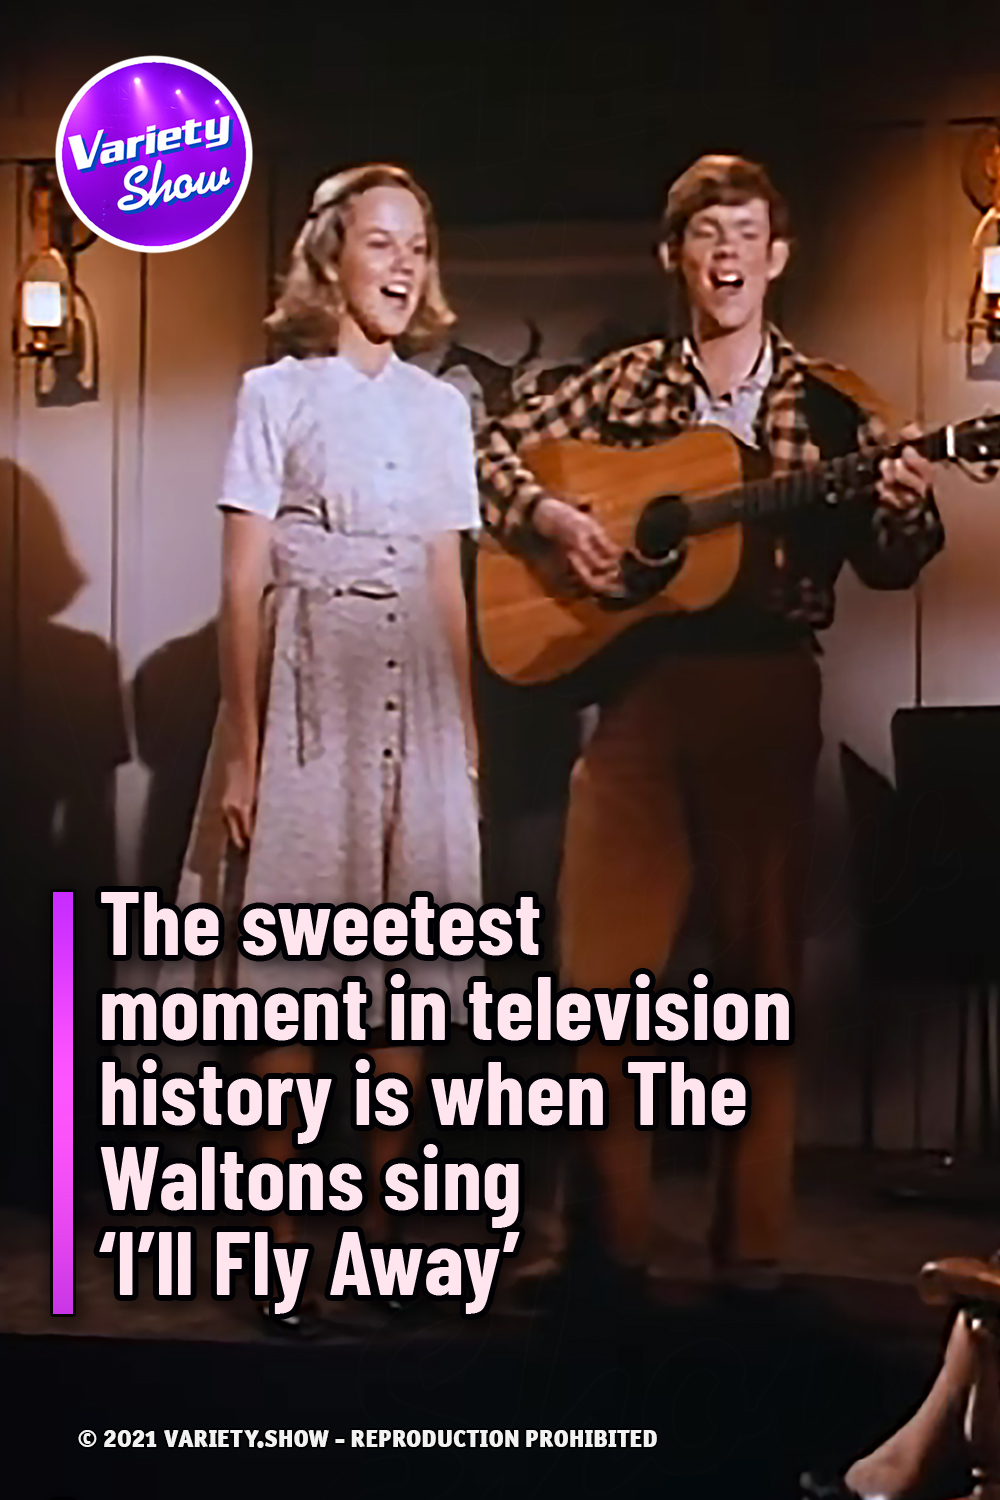 The sweetest moment in television history is when The Waltons sing ‘I’ll Fly Away’